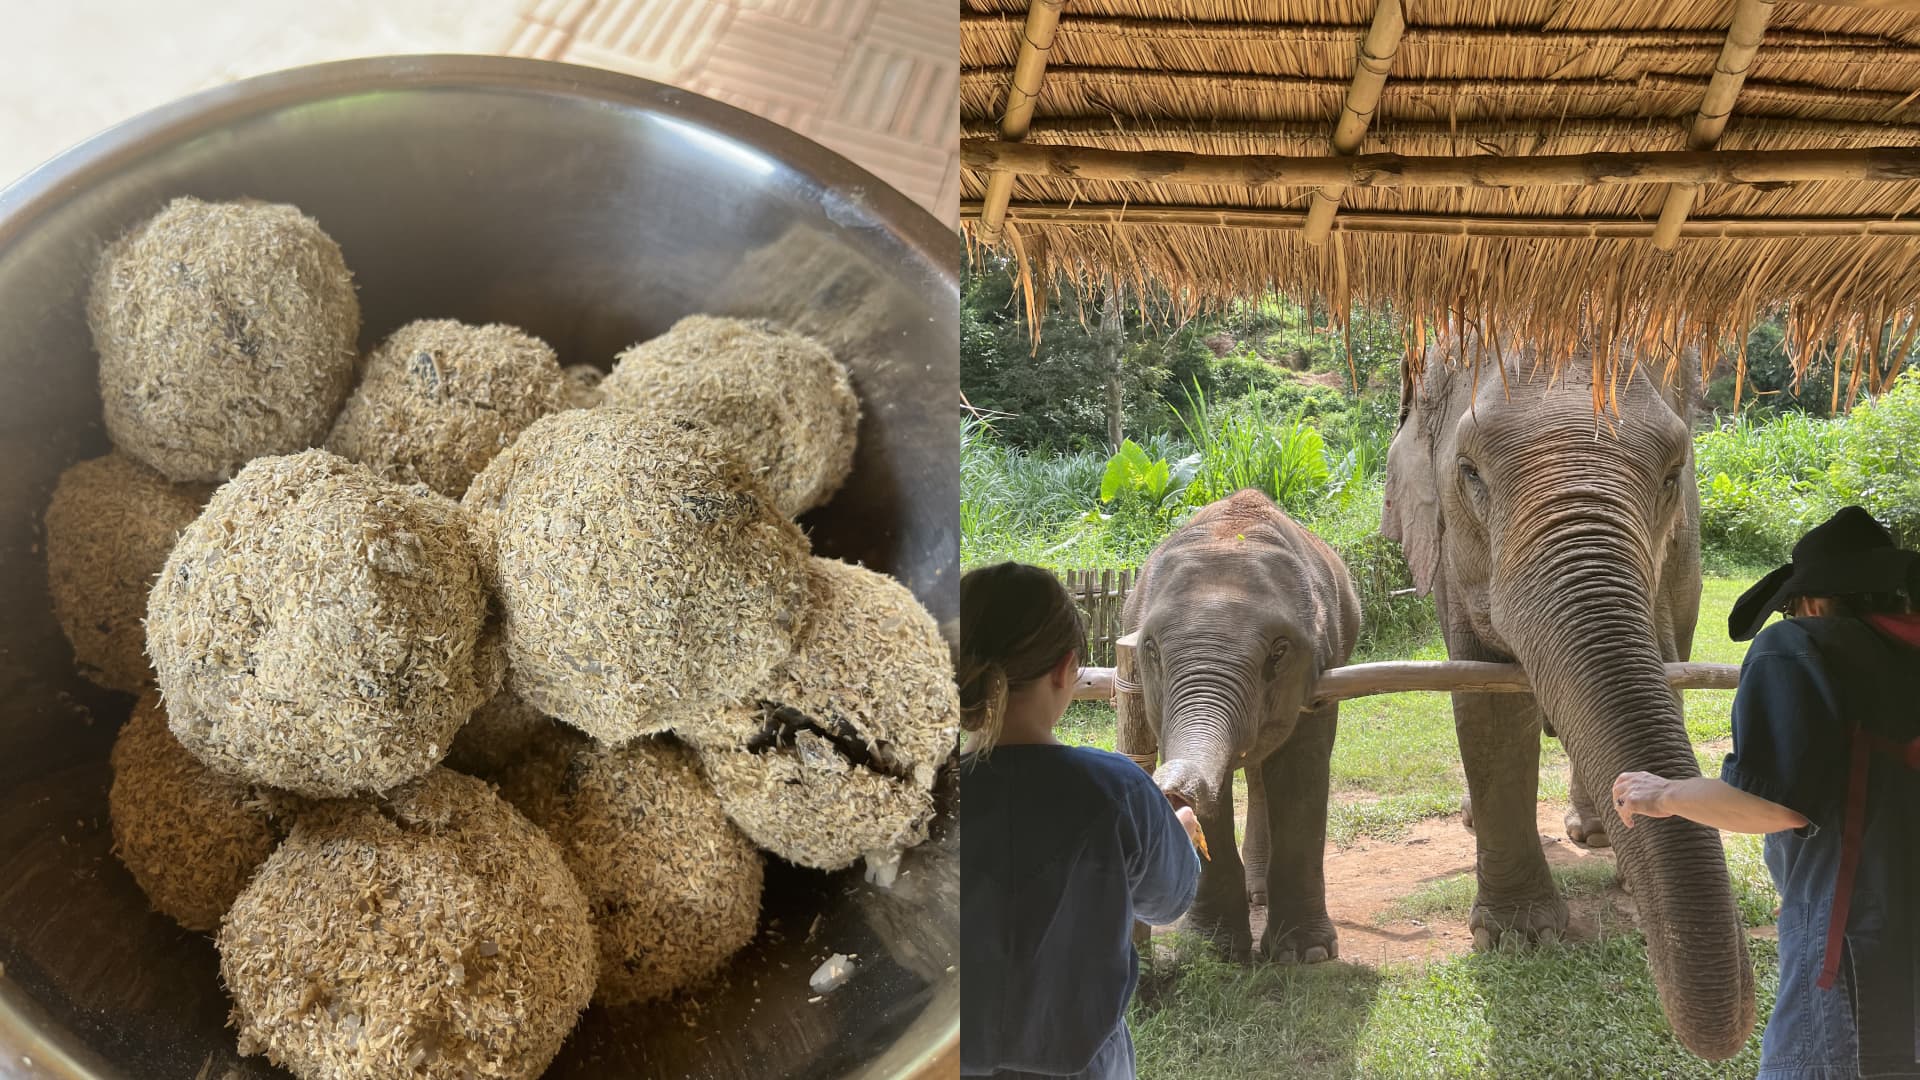 Guests at Anantara's Golden Triangle Elephant Camp & Resort can prepare 